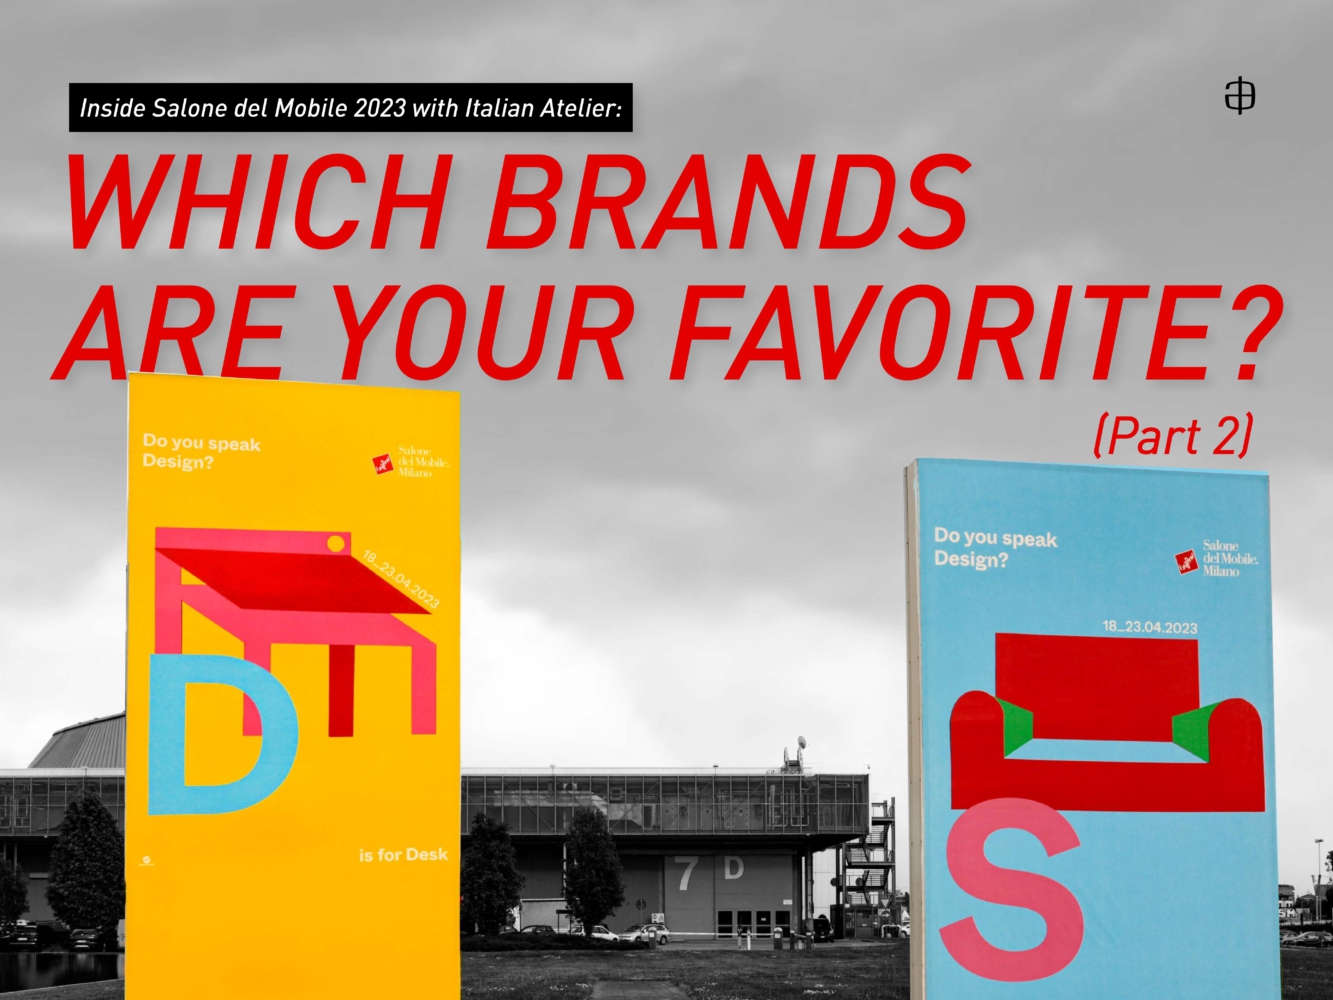 Inside Salone del Mobile 2023 with Italian Atelier: Which brands are your favorite? (Part 2)